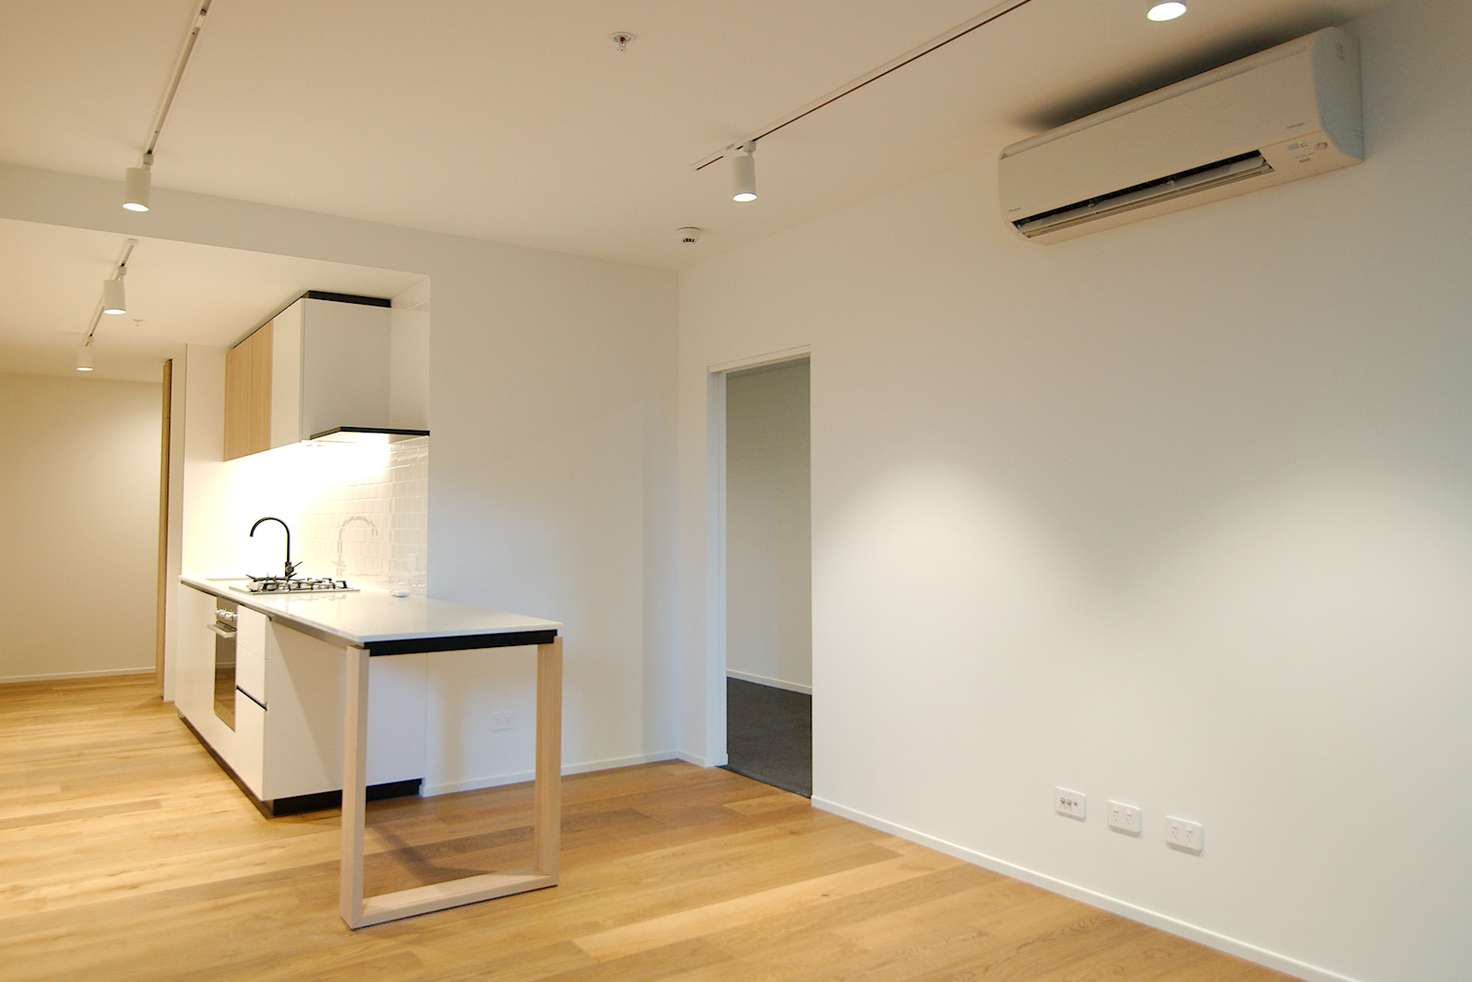 Main view of Homely apartment listing, 10/121 Rosslyn Street, West Melbourne VIC 3003